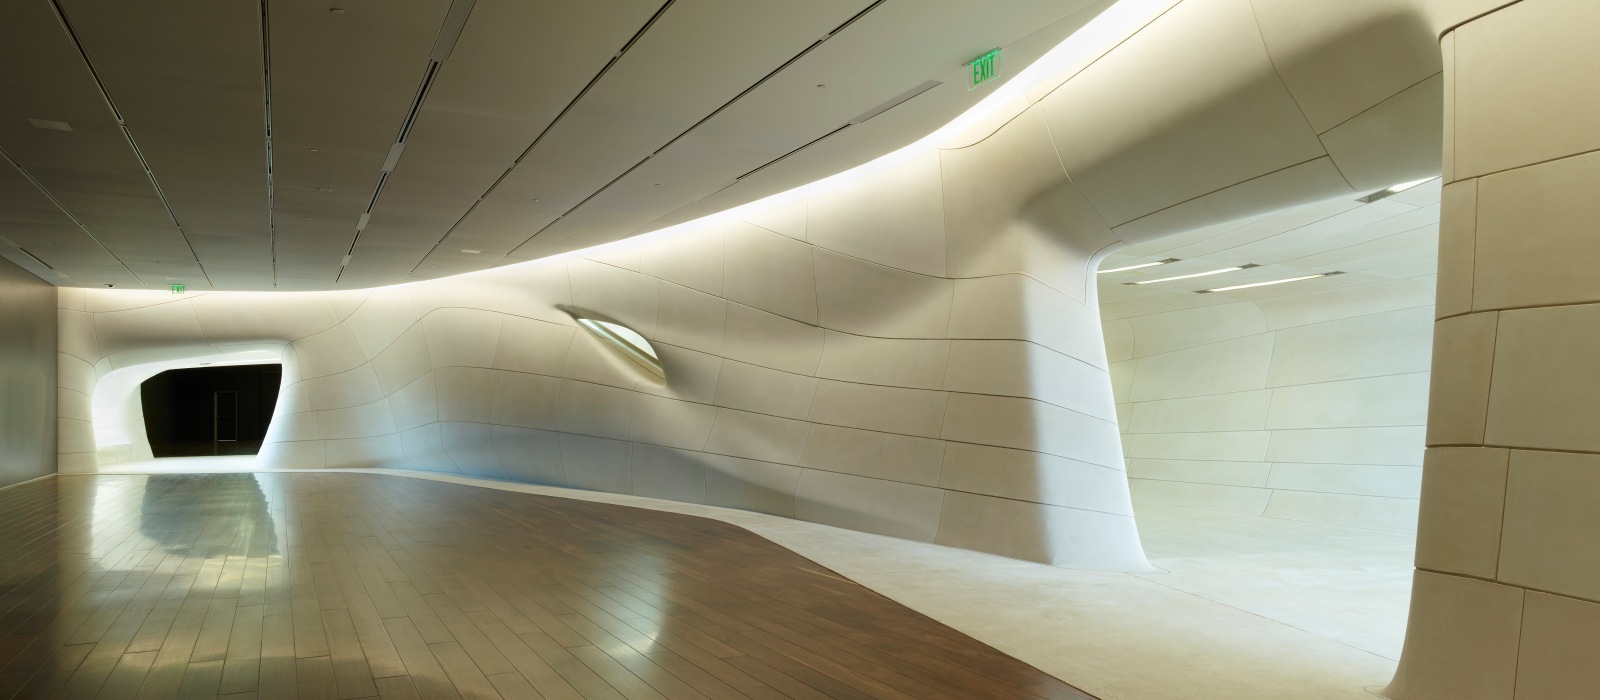 LA State Museum Sports Hall of Fame | Trahan Architects | Cast Stone Veneer Developed using Complex Shaped, Large Cast Stone Pieces Fitting within Stringent Tolerance Requirements | LEARN MORE About Design, Manufacturing Process...